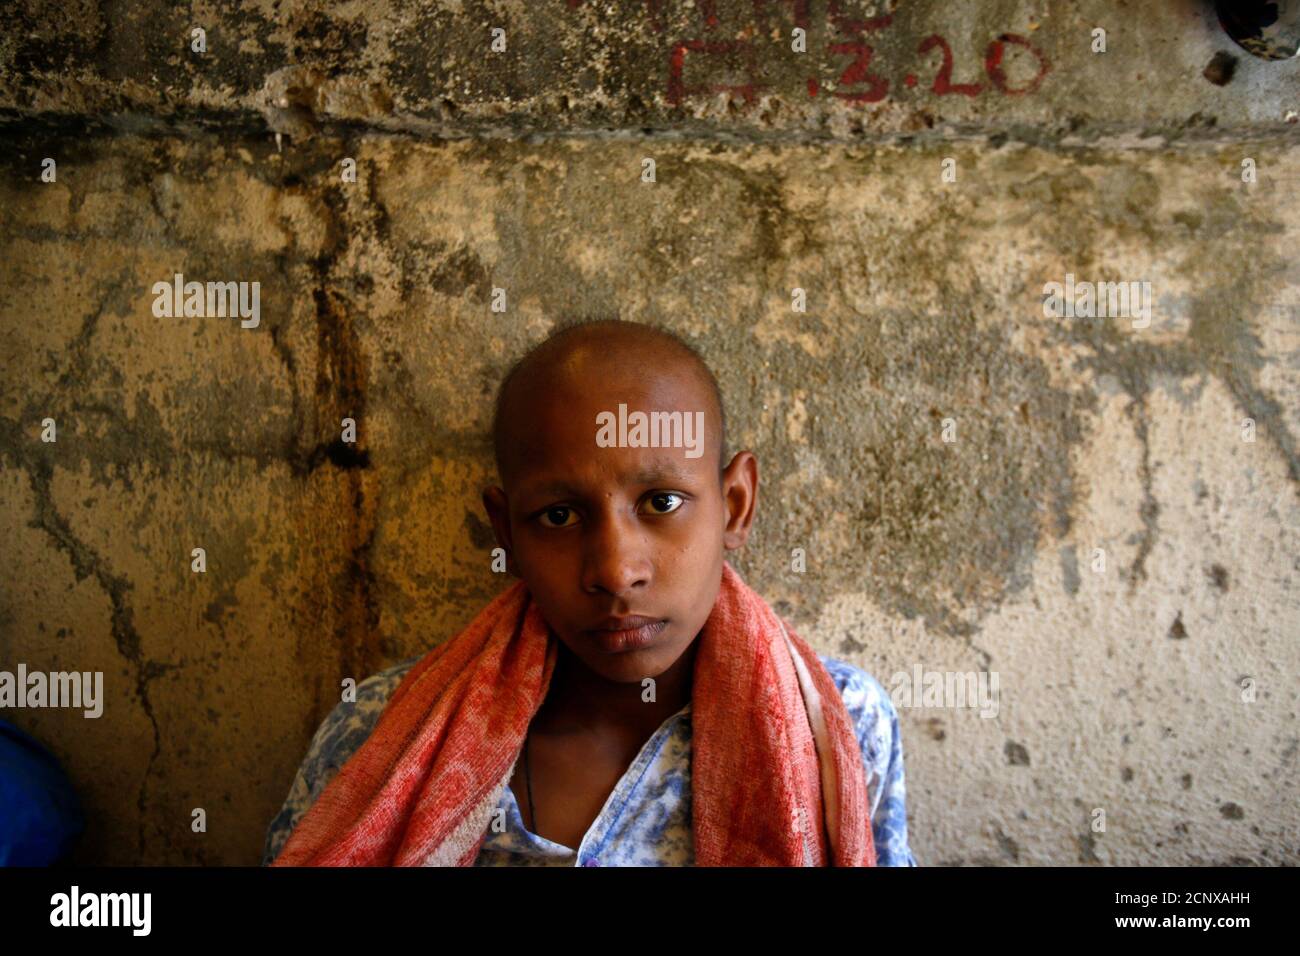 Cancer patient Raj Kishore Kumar, 12, sits inside a makeshift shelter on a pavement outside the Tata Memorial Hospital in Mumbai April 2, 2013.  India's top court dismissed Swiss drugmaker Novartis AG's attempt to win patent protection for its cancer drug Glivec, a blow to Western pharmaceutical firms targeting India to drive sales and a victory for local makers of cheap generics. REUTERS/Vivek Prakash (INDIA - Tags: BUSINESS DRUGS SOCIETY HEALTH) Stock Photo